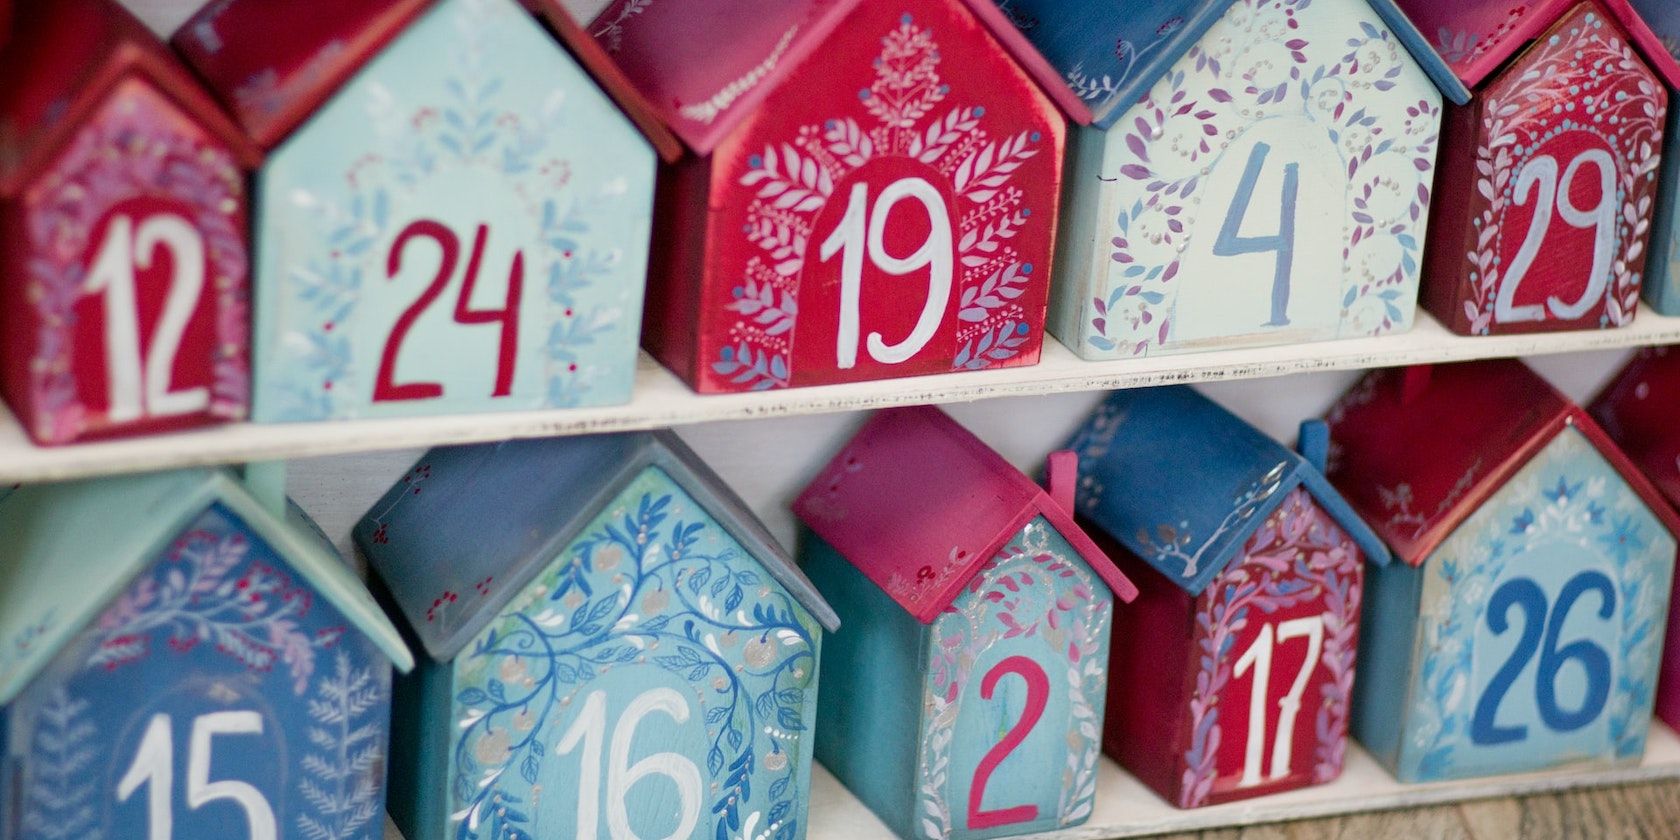 An advent calendar made of numbered wooden boxes painted red and blue.